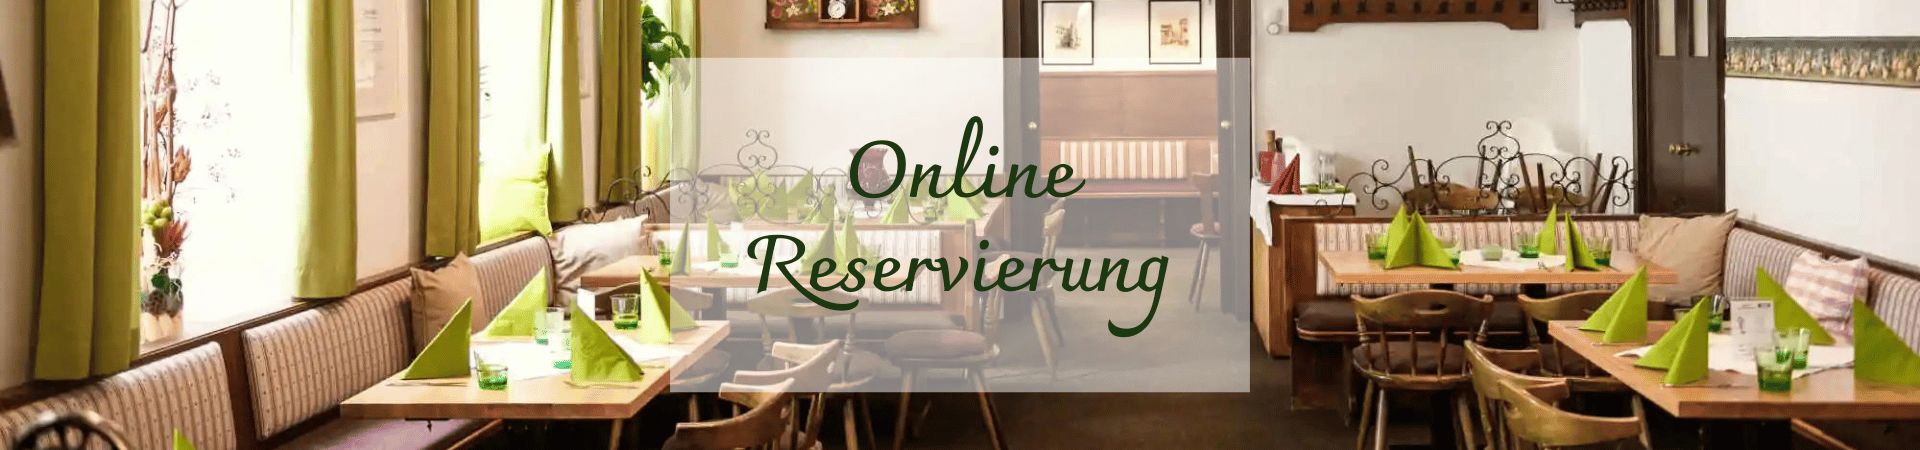 https://cdn.gastronovi.com/tmp/images/reservierung-webseite-unterseite-1920-450-px_1920x450_or_21366378711881c60.png